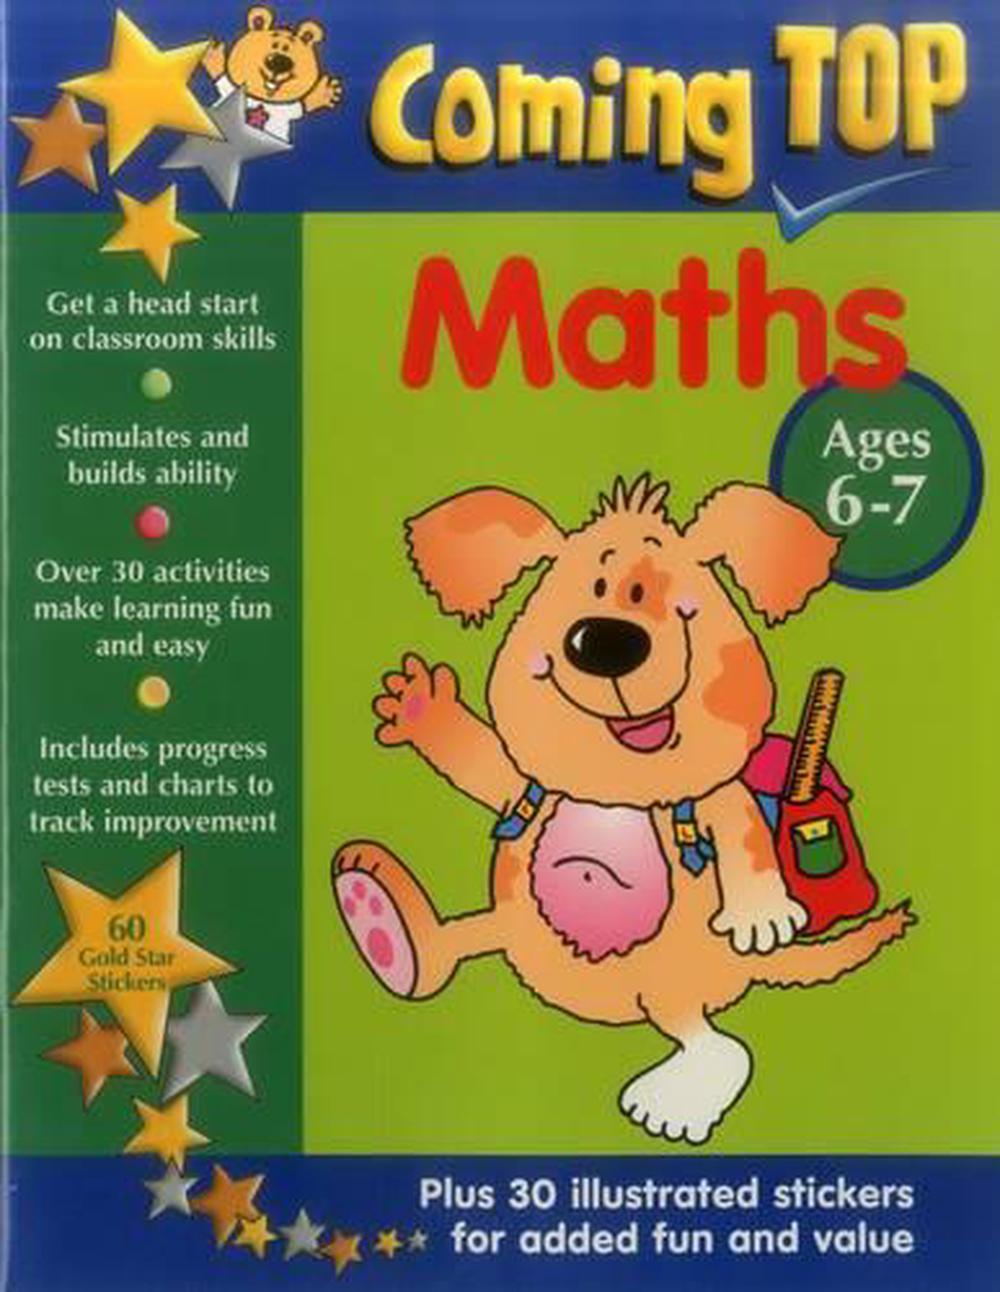 Coming Top Maths Ages 6